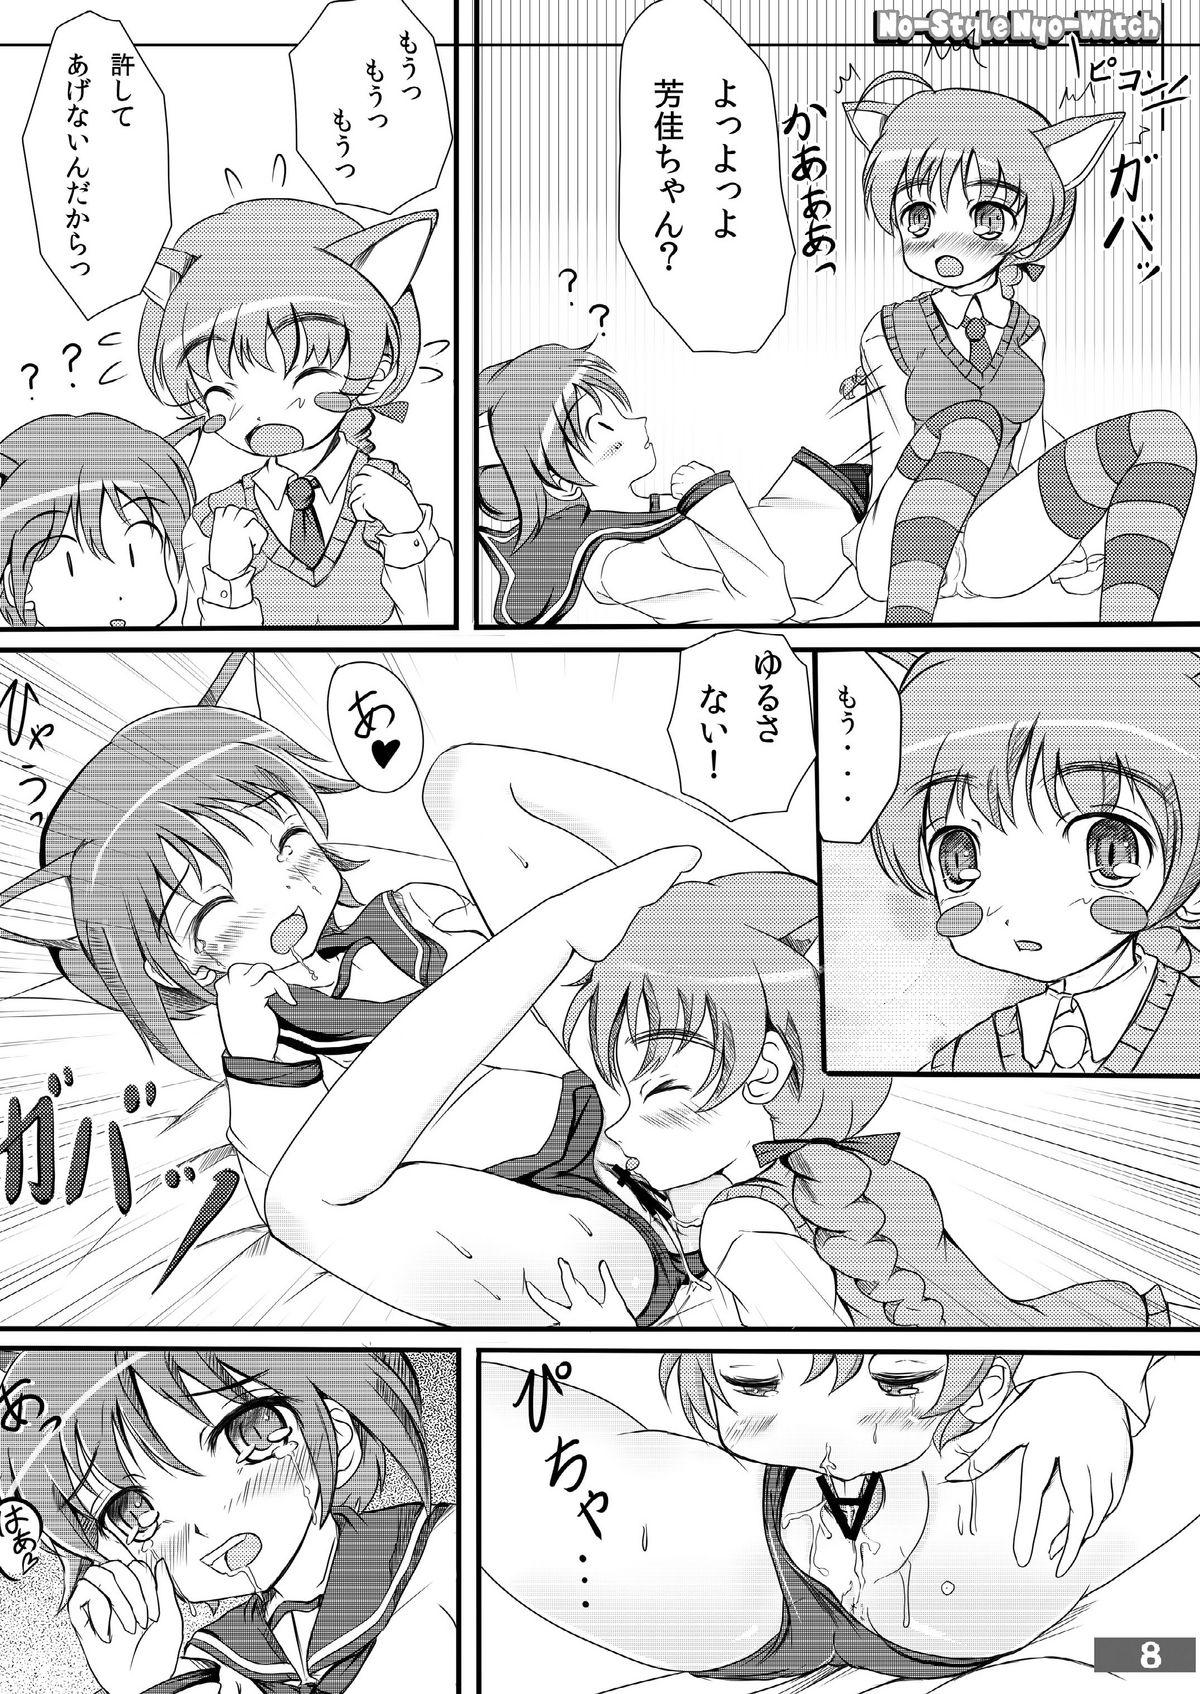 Gay Medic (C79) [kyabe's FACTORY (Kyabe Suke)] No-Style Nyo-Witch (Strike Witches) - Strike witches Euro - Page 8